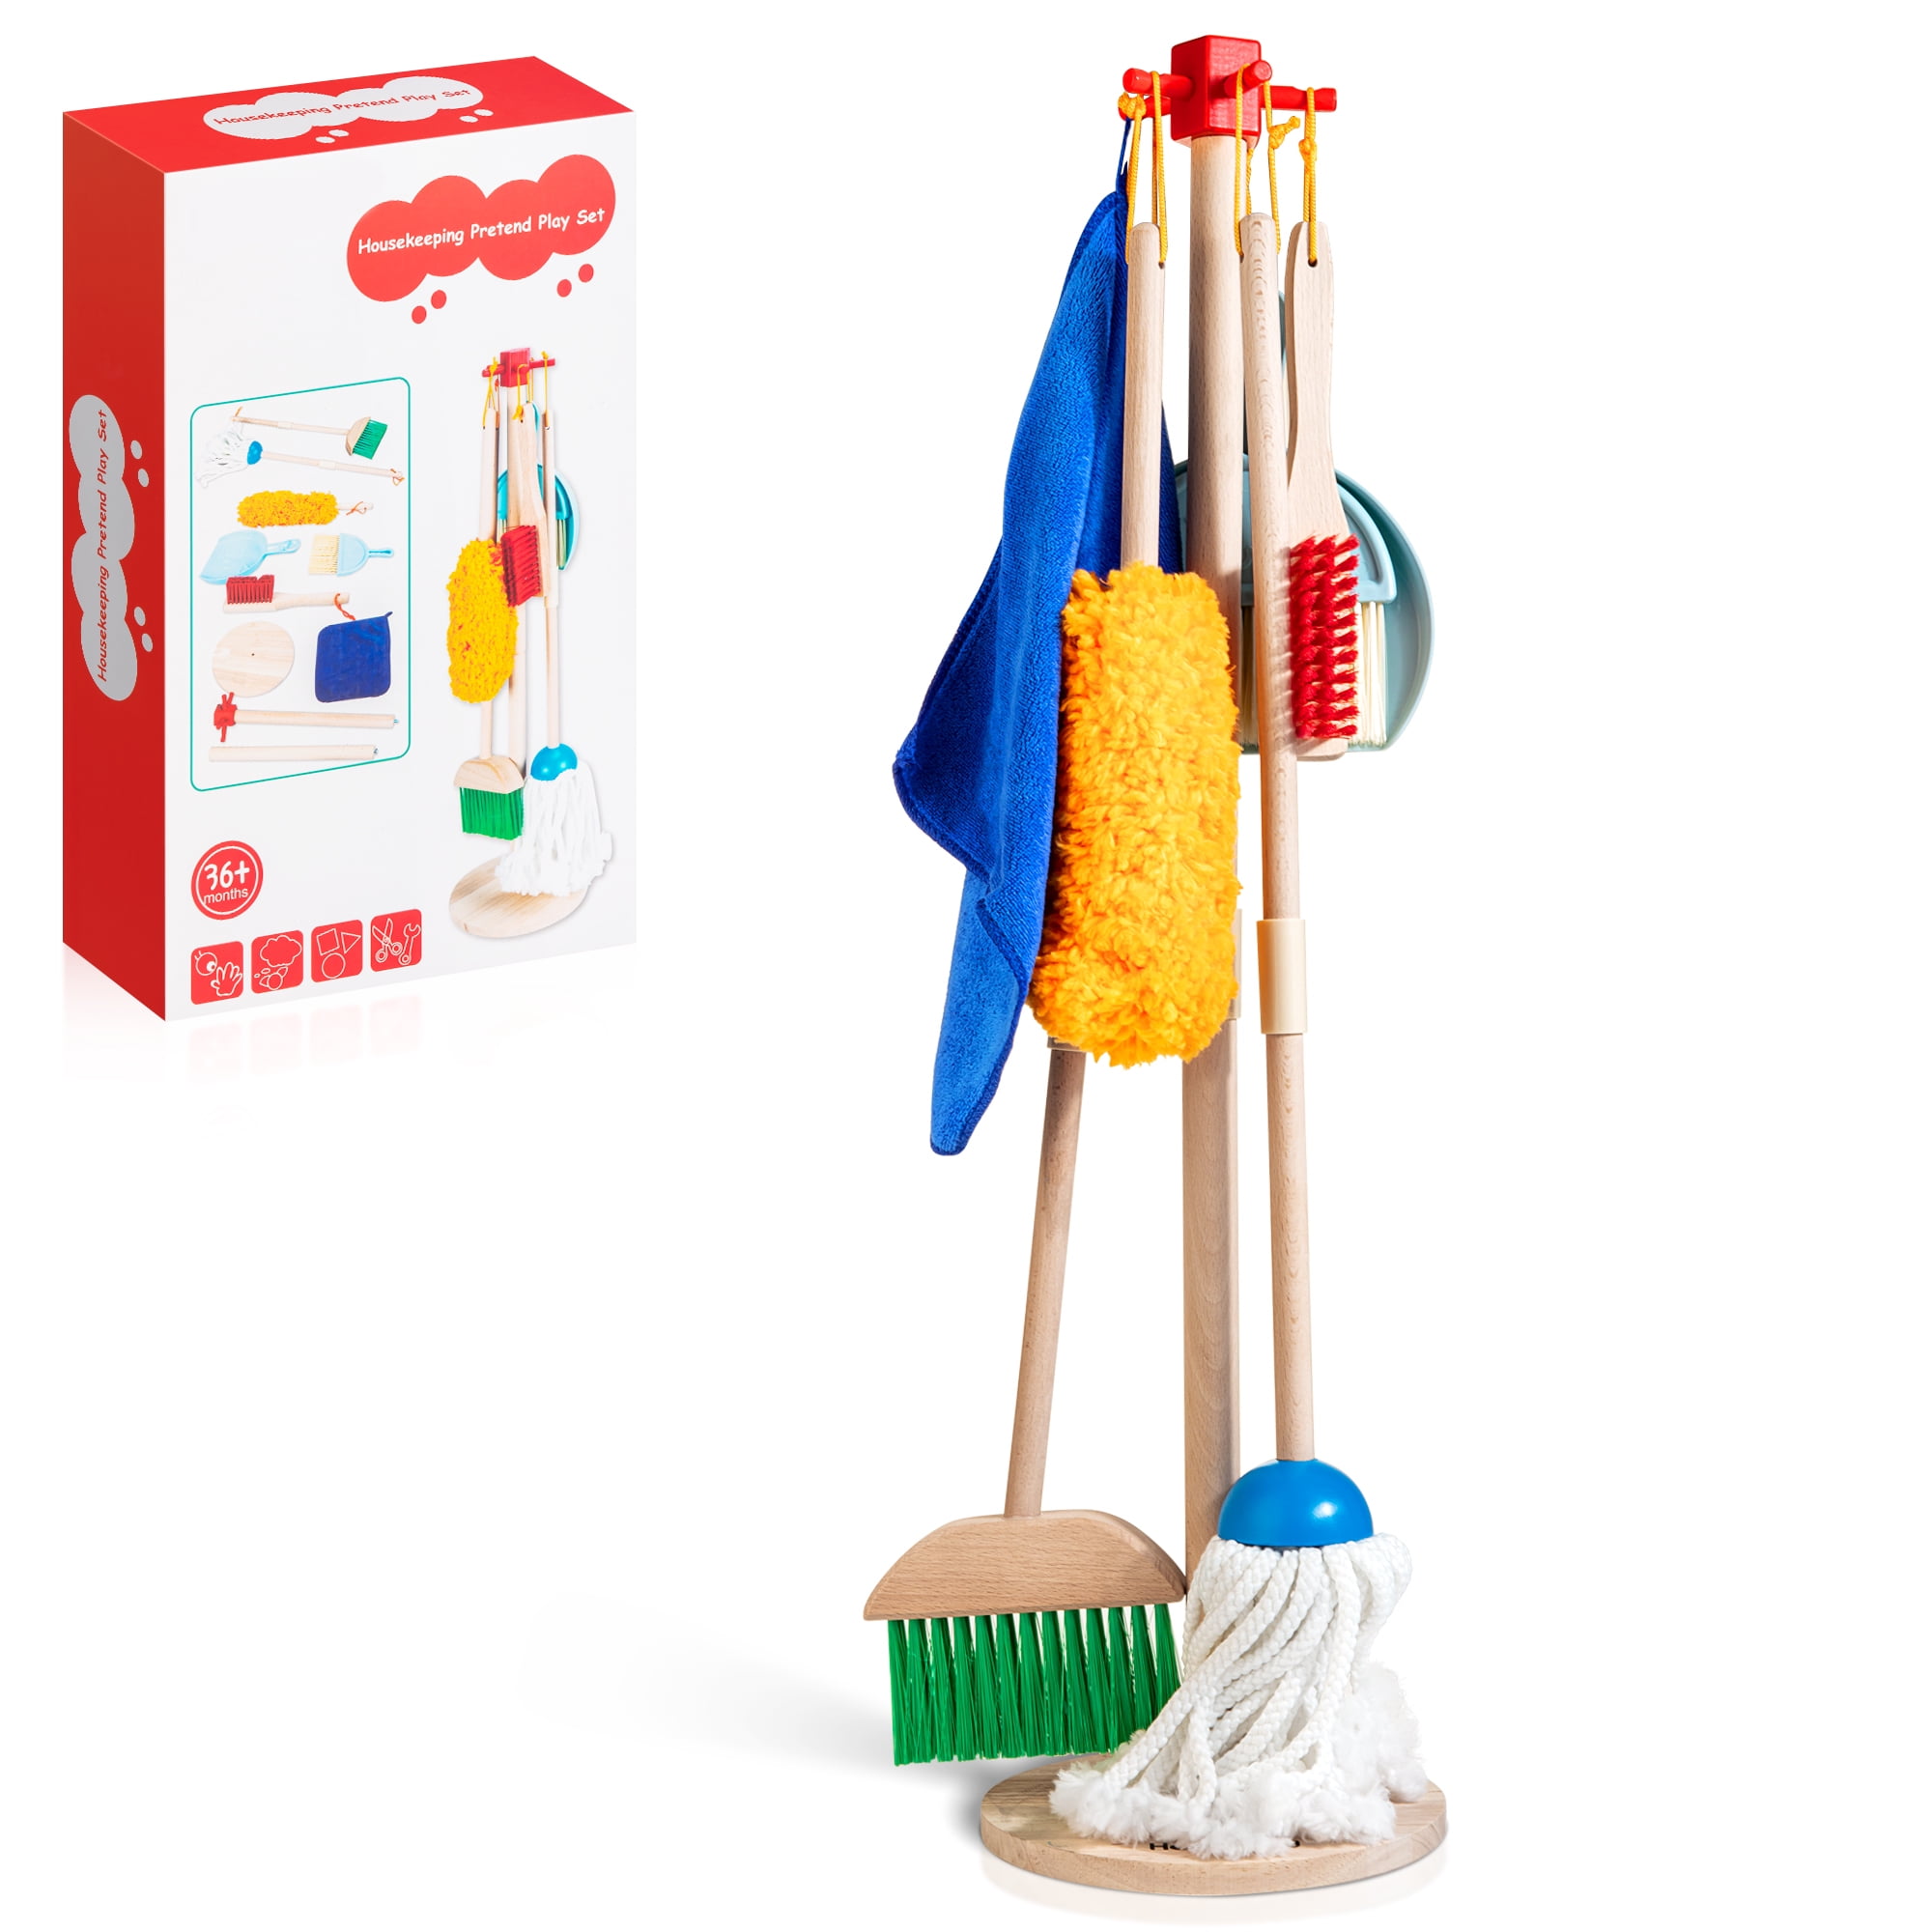 SDJMa Kids Cleaning Set 10 Piece - Toy Cleaning Set Includes Broom, Mop,  Brush, Dust Pan, Soap, Sponge, Spray, Bucket, - Toy Kitchen Toddler  Cleaning